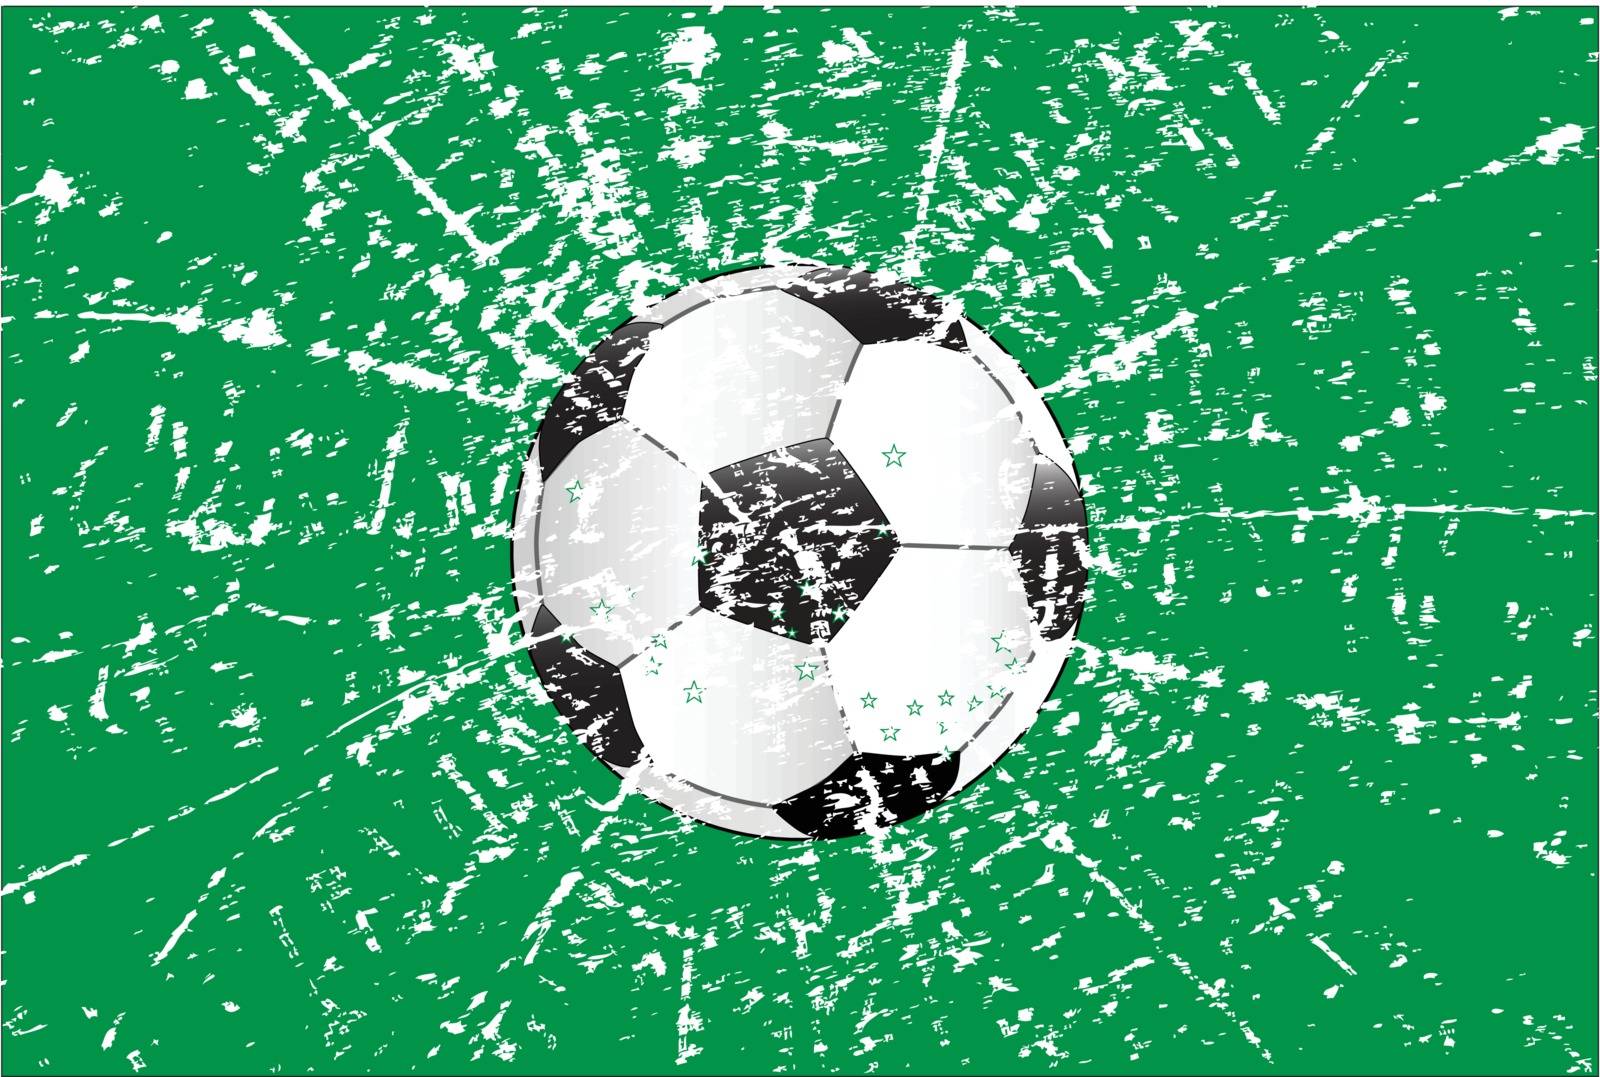 Typical football with a blue and white splatter style grunge background